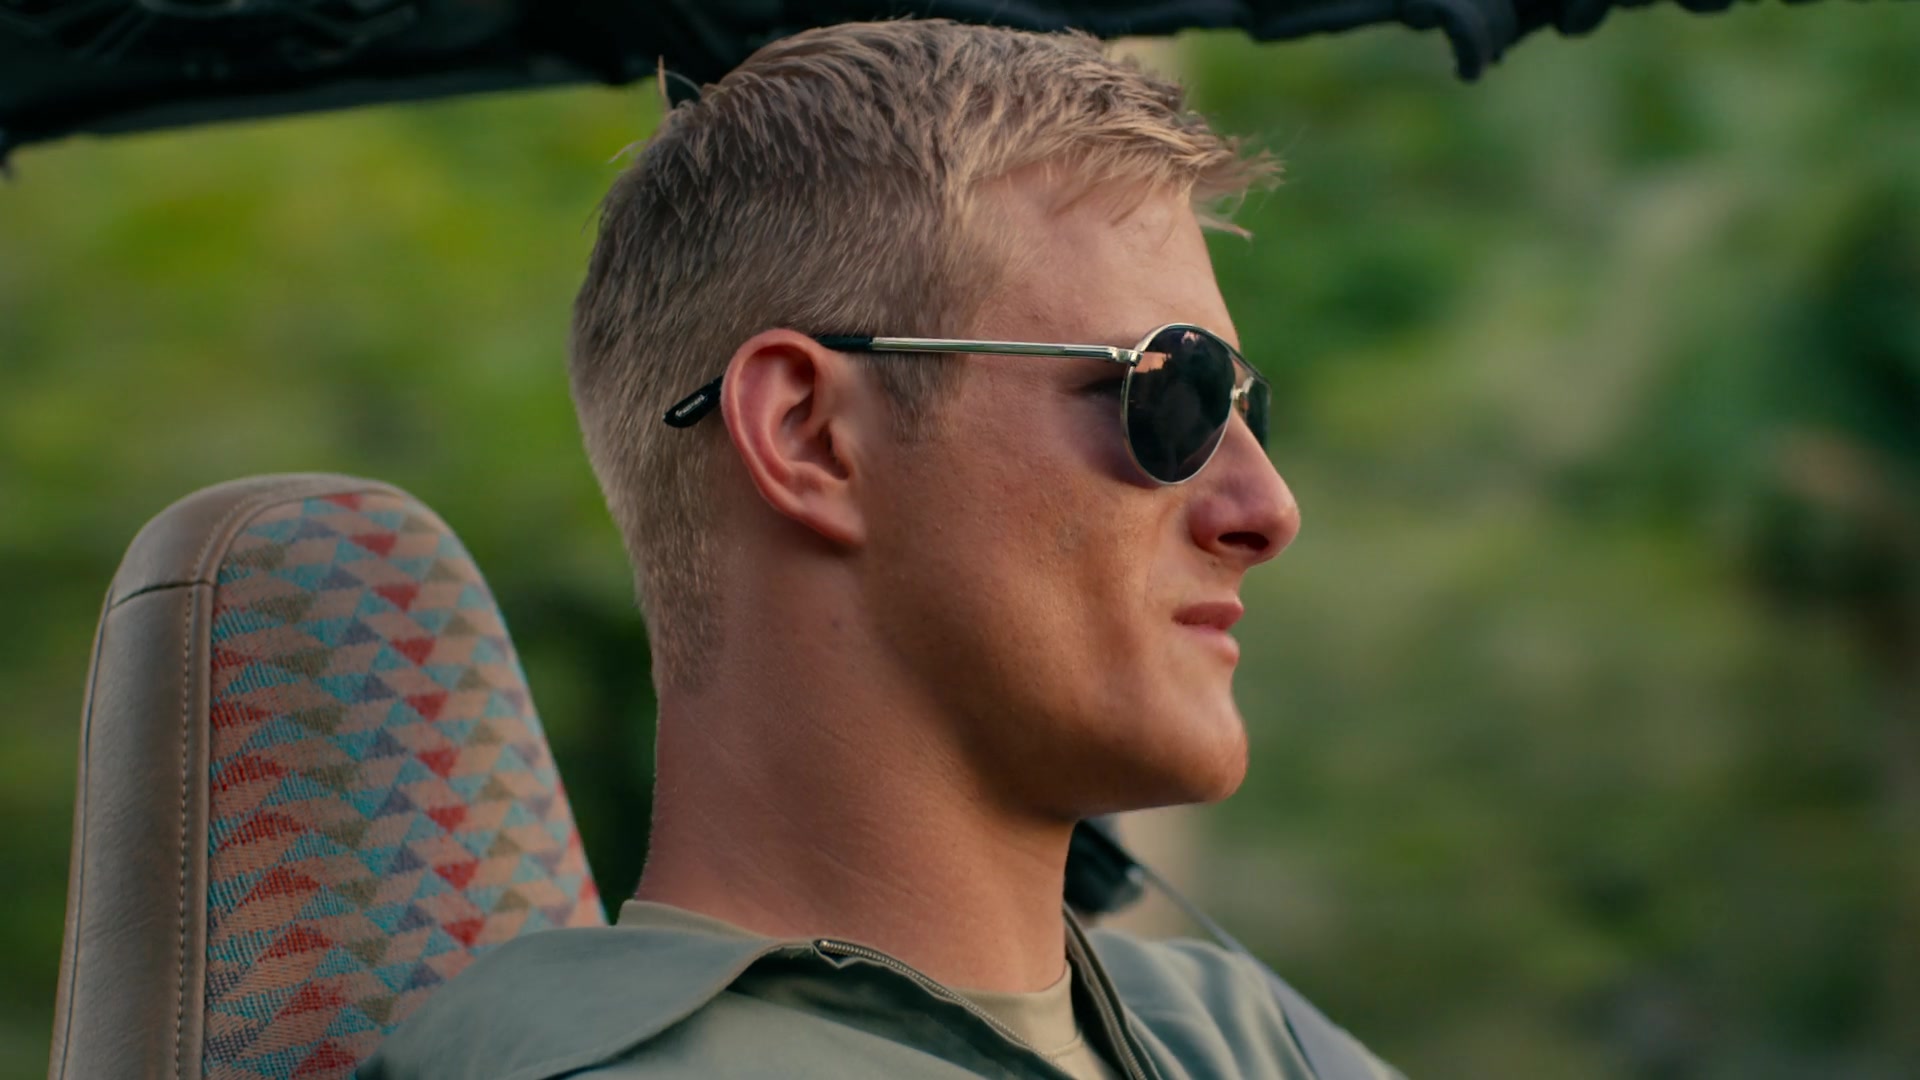 midlertidig Ultimate bypass Tom Ford Marko Pilot Sunglasses Of Alexander Ludwig As Captain Andrew Jantz  In Operation Christmas Drop (2020)